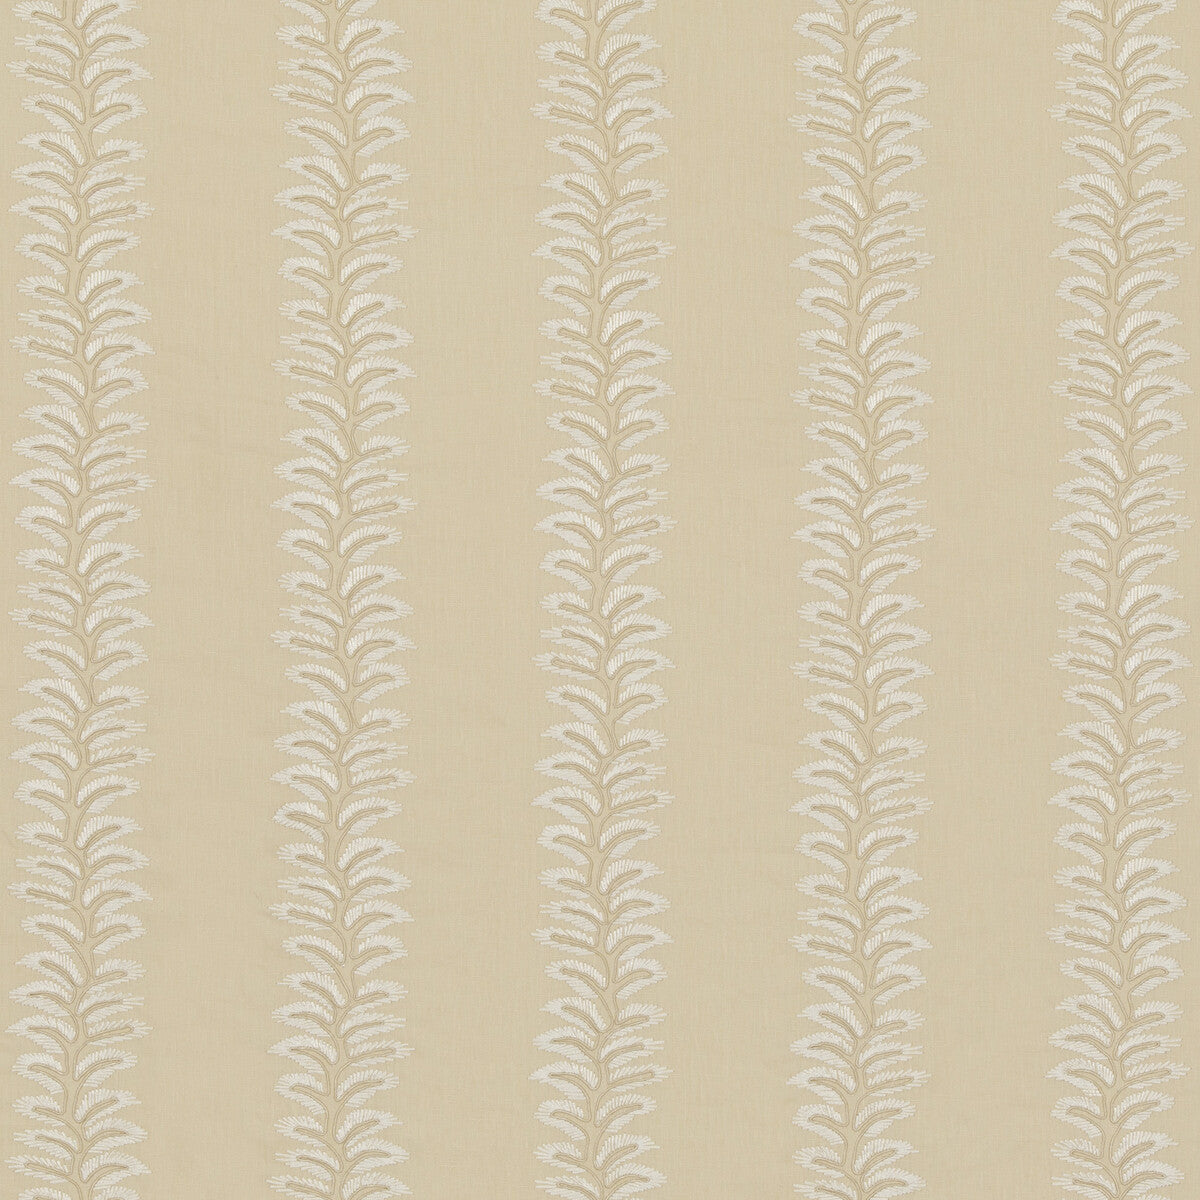 New Bradbourne fabric in cream color - pattern BF10946.120.0 - by G P &amp; J Baker in the Ashmore collection